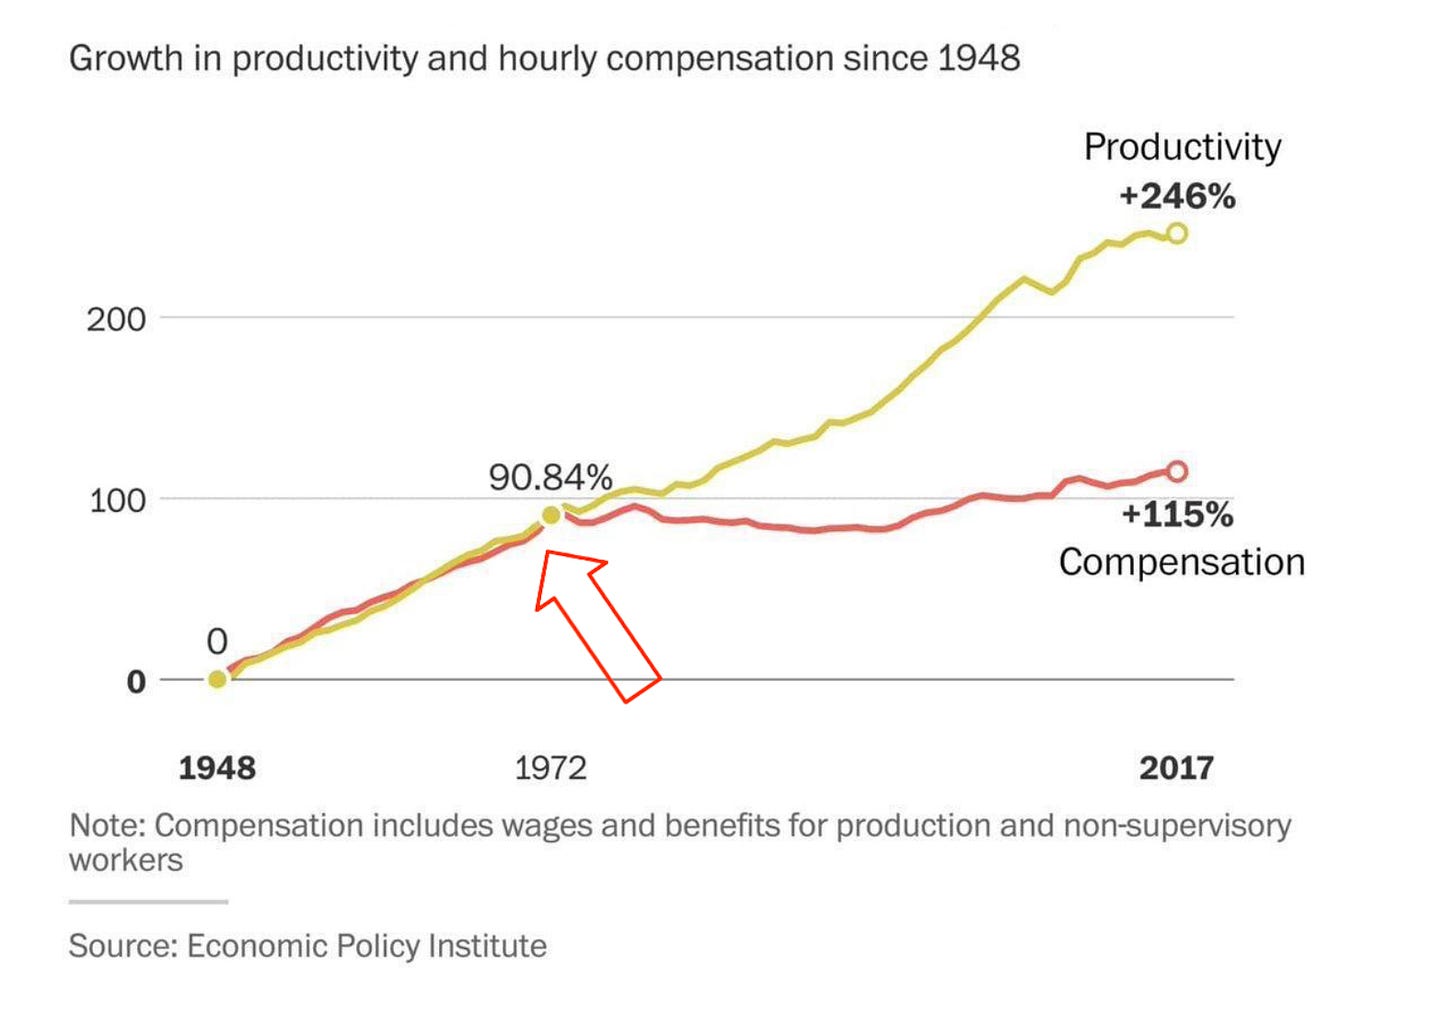 graph showing productivity going up from 1972 onwards but compensation staying stagnant